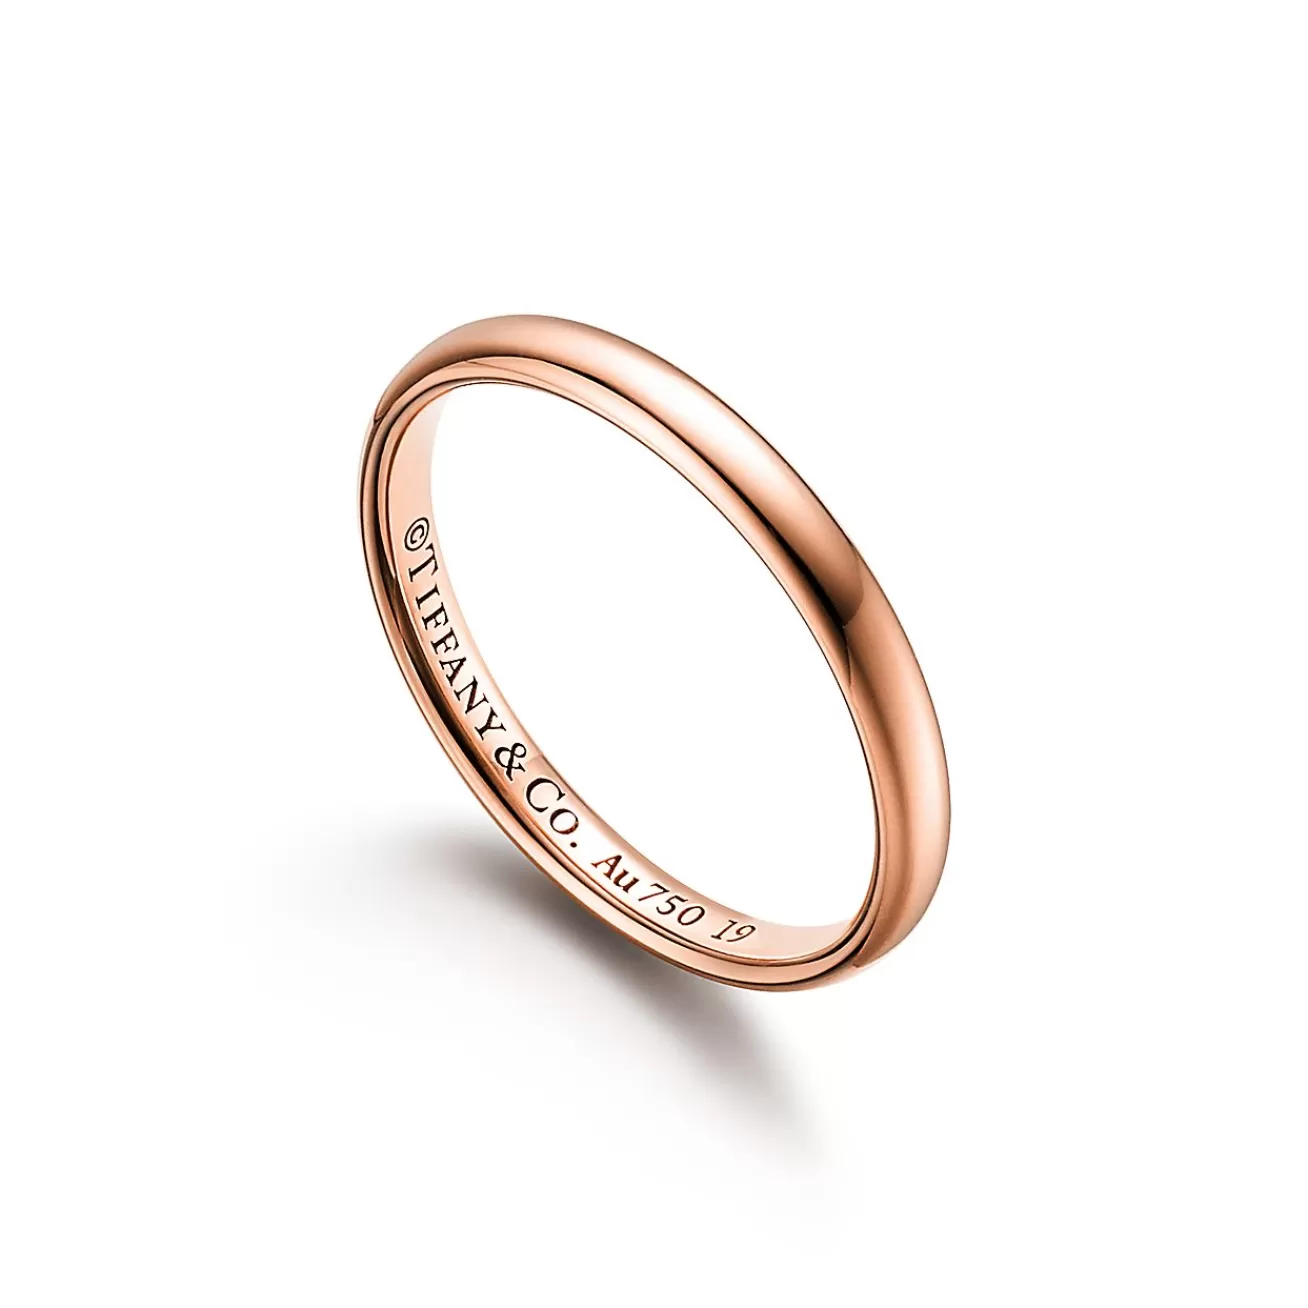 Tiffany & Co. Tiffany Forever Wedding Band Ring in Rose Gold, 2.5 mm Wide | ^Women Rings | Rose Gold Jewelry